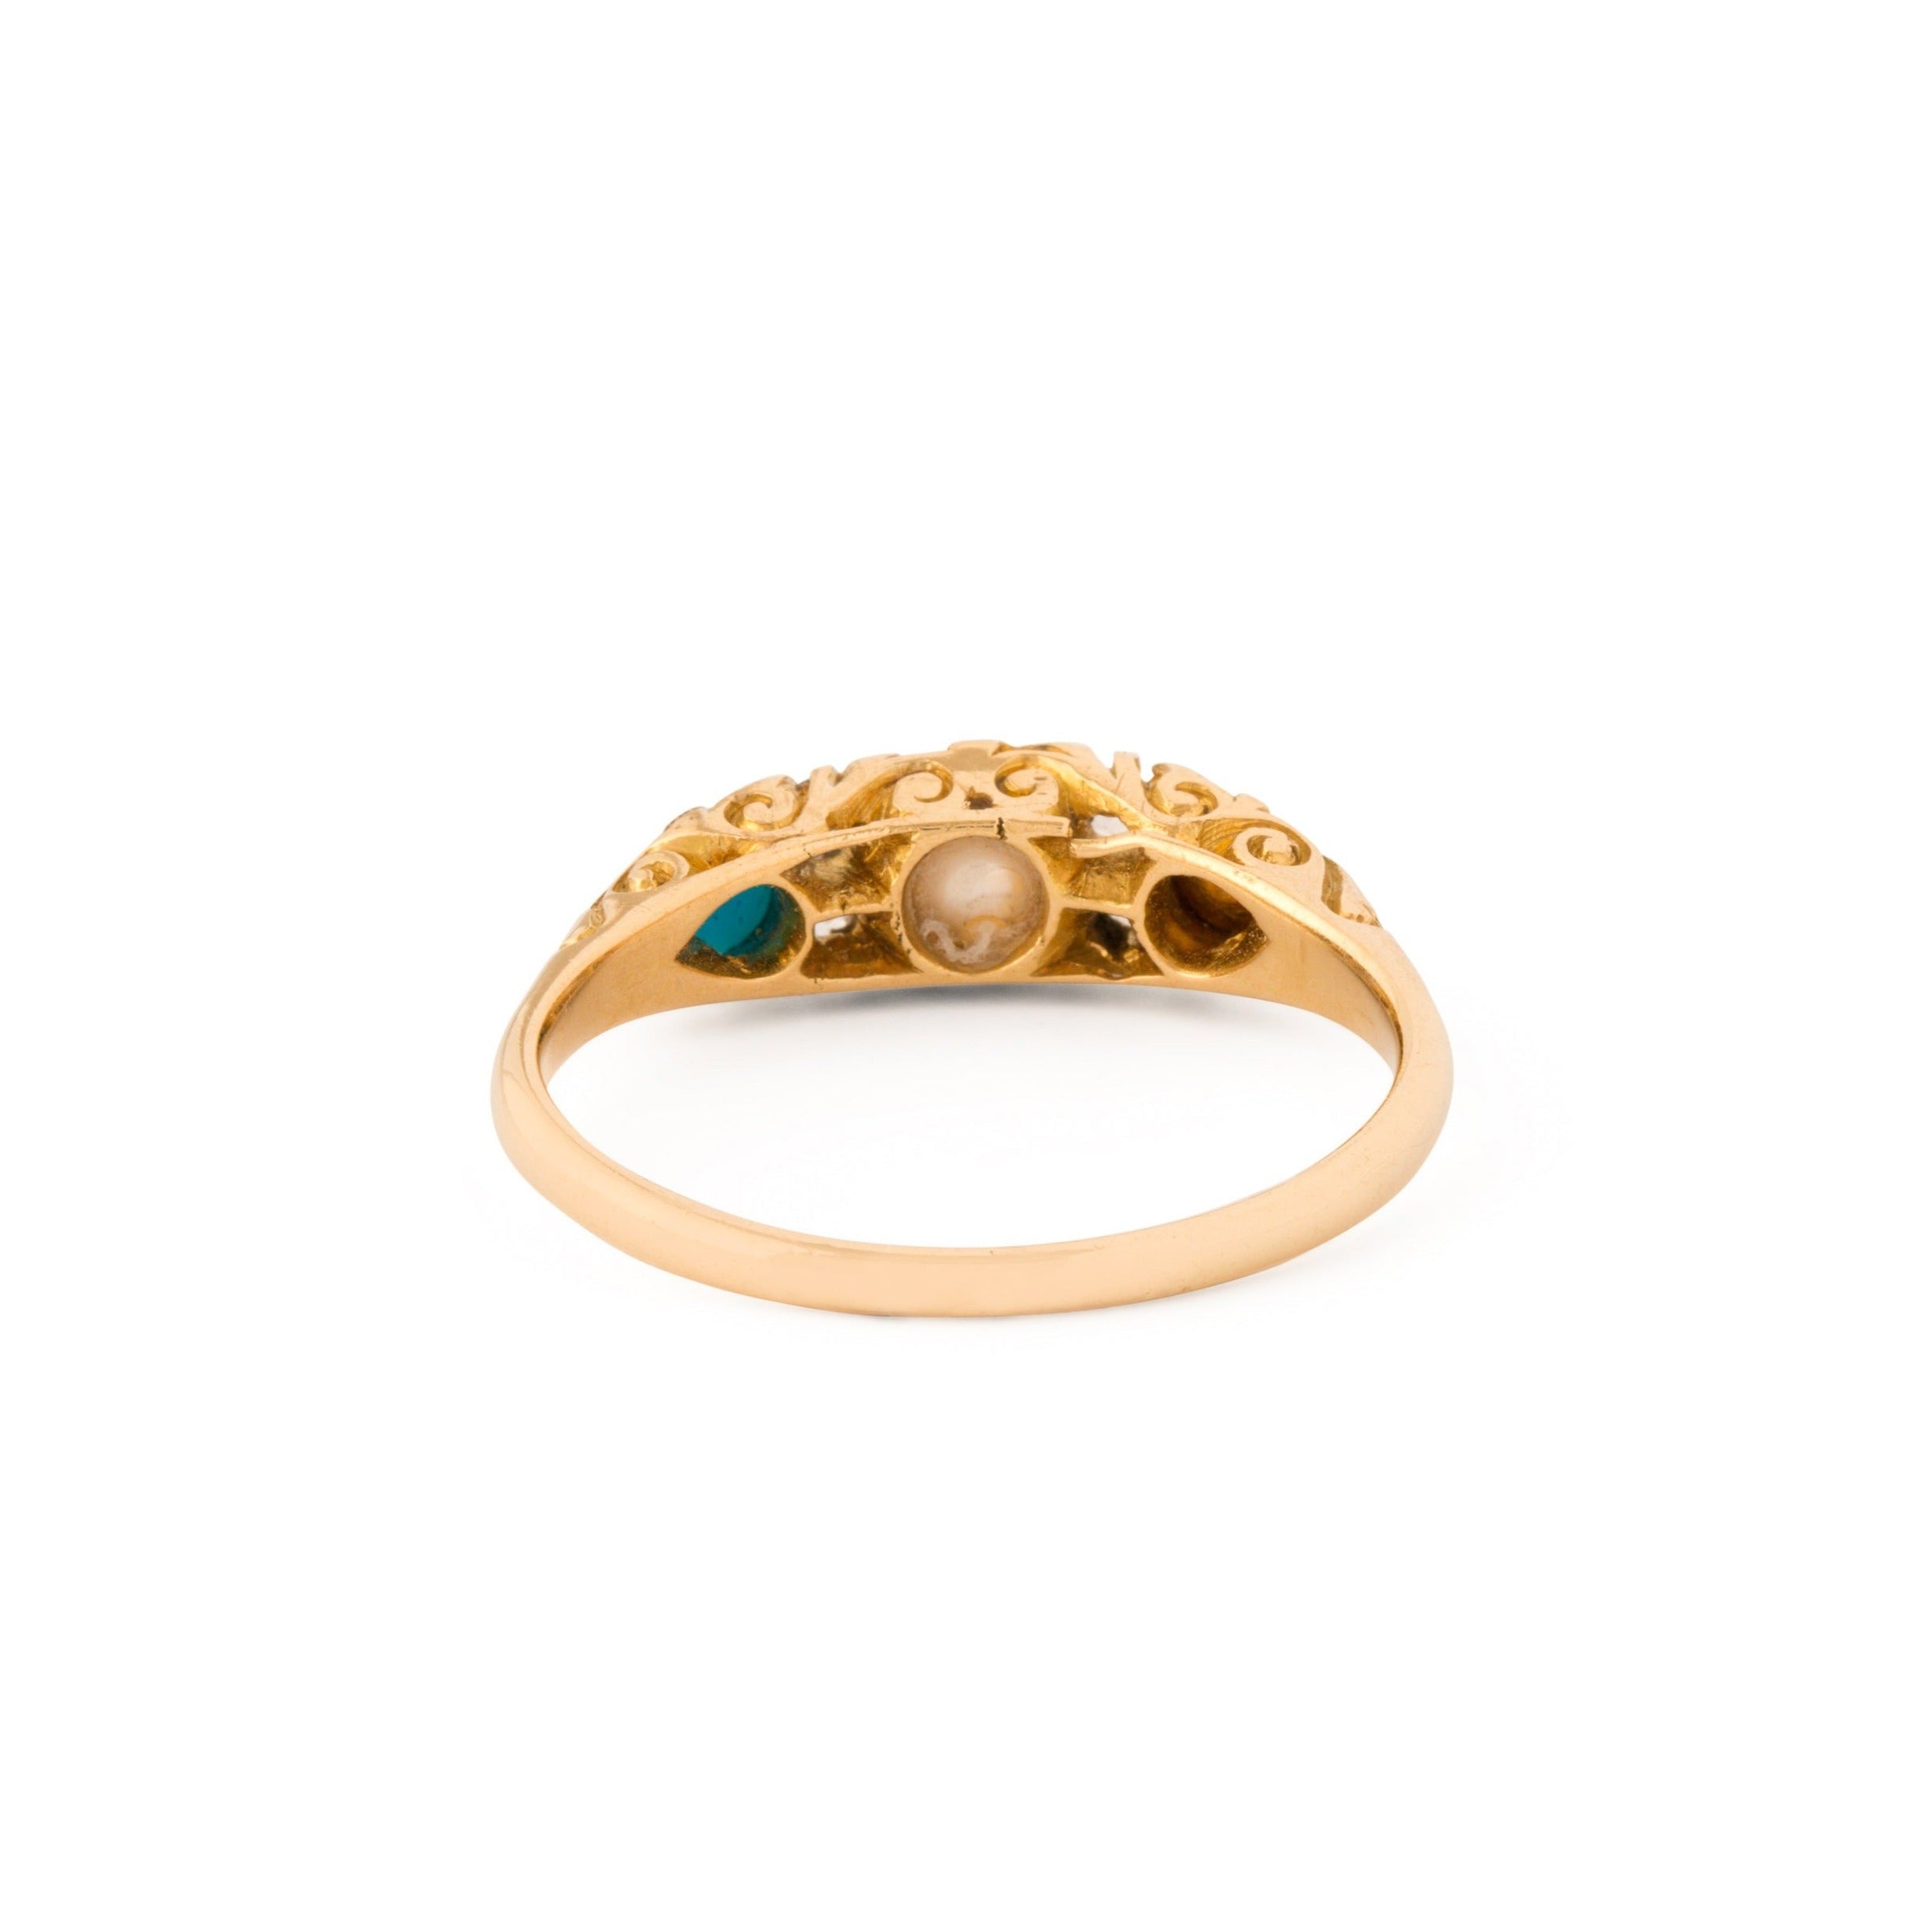 Victorian Pearl, Turquoise, and Diamond, 18k Gold Ring